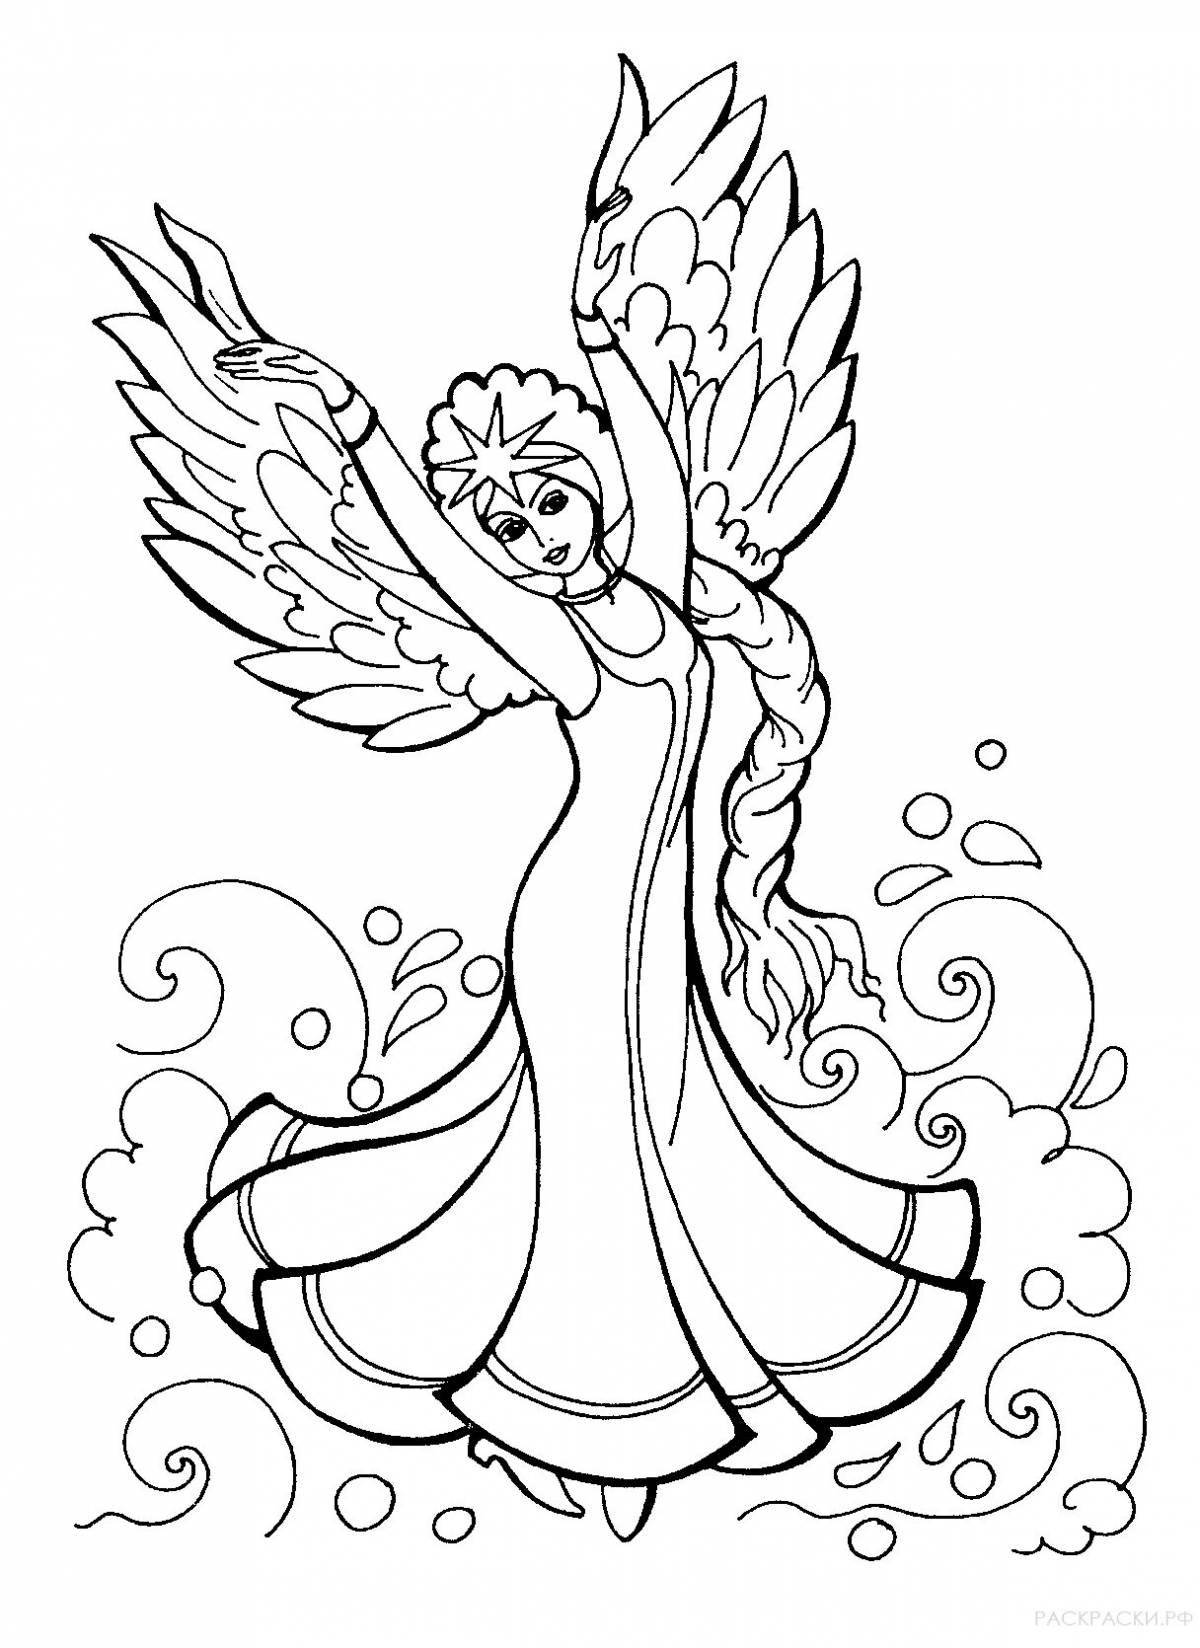 An entertaining coloring book based on Pushkin's fairy tales for preschoolers